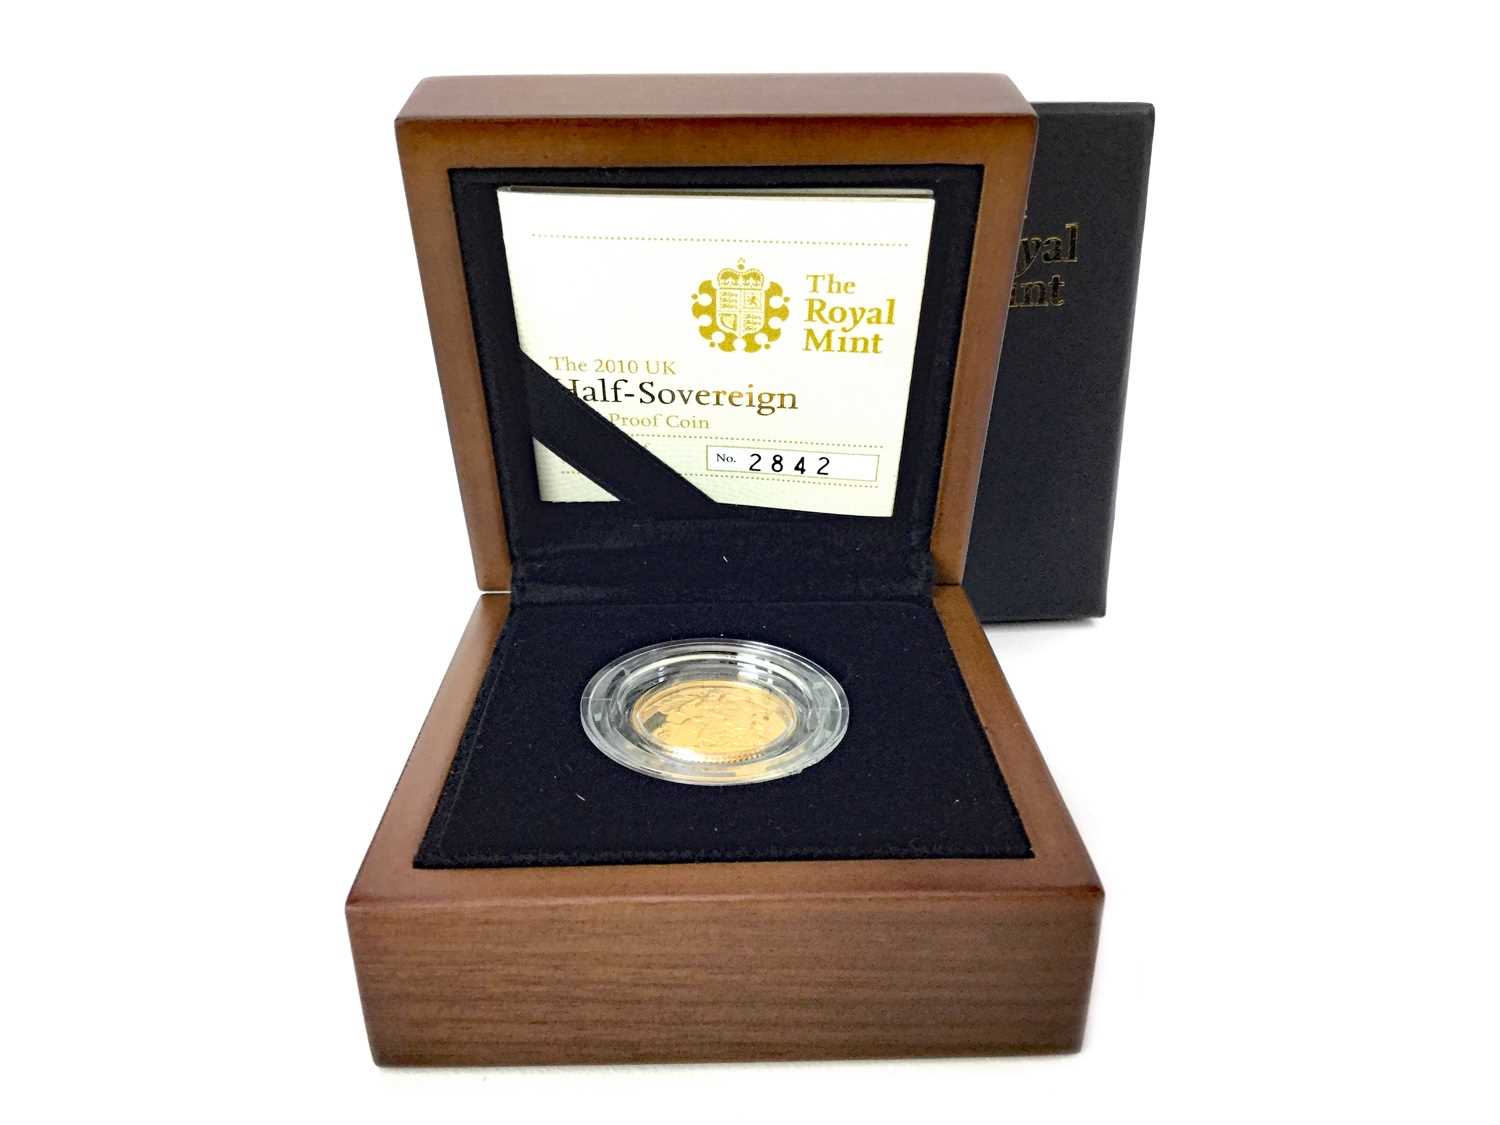 Lot 18 - A THE ROYAL MINT THE 2010 HALF SOVEREIGN